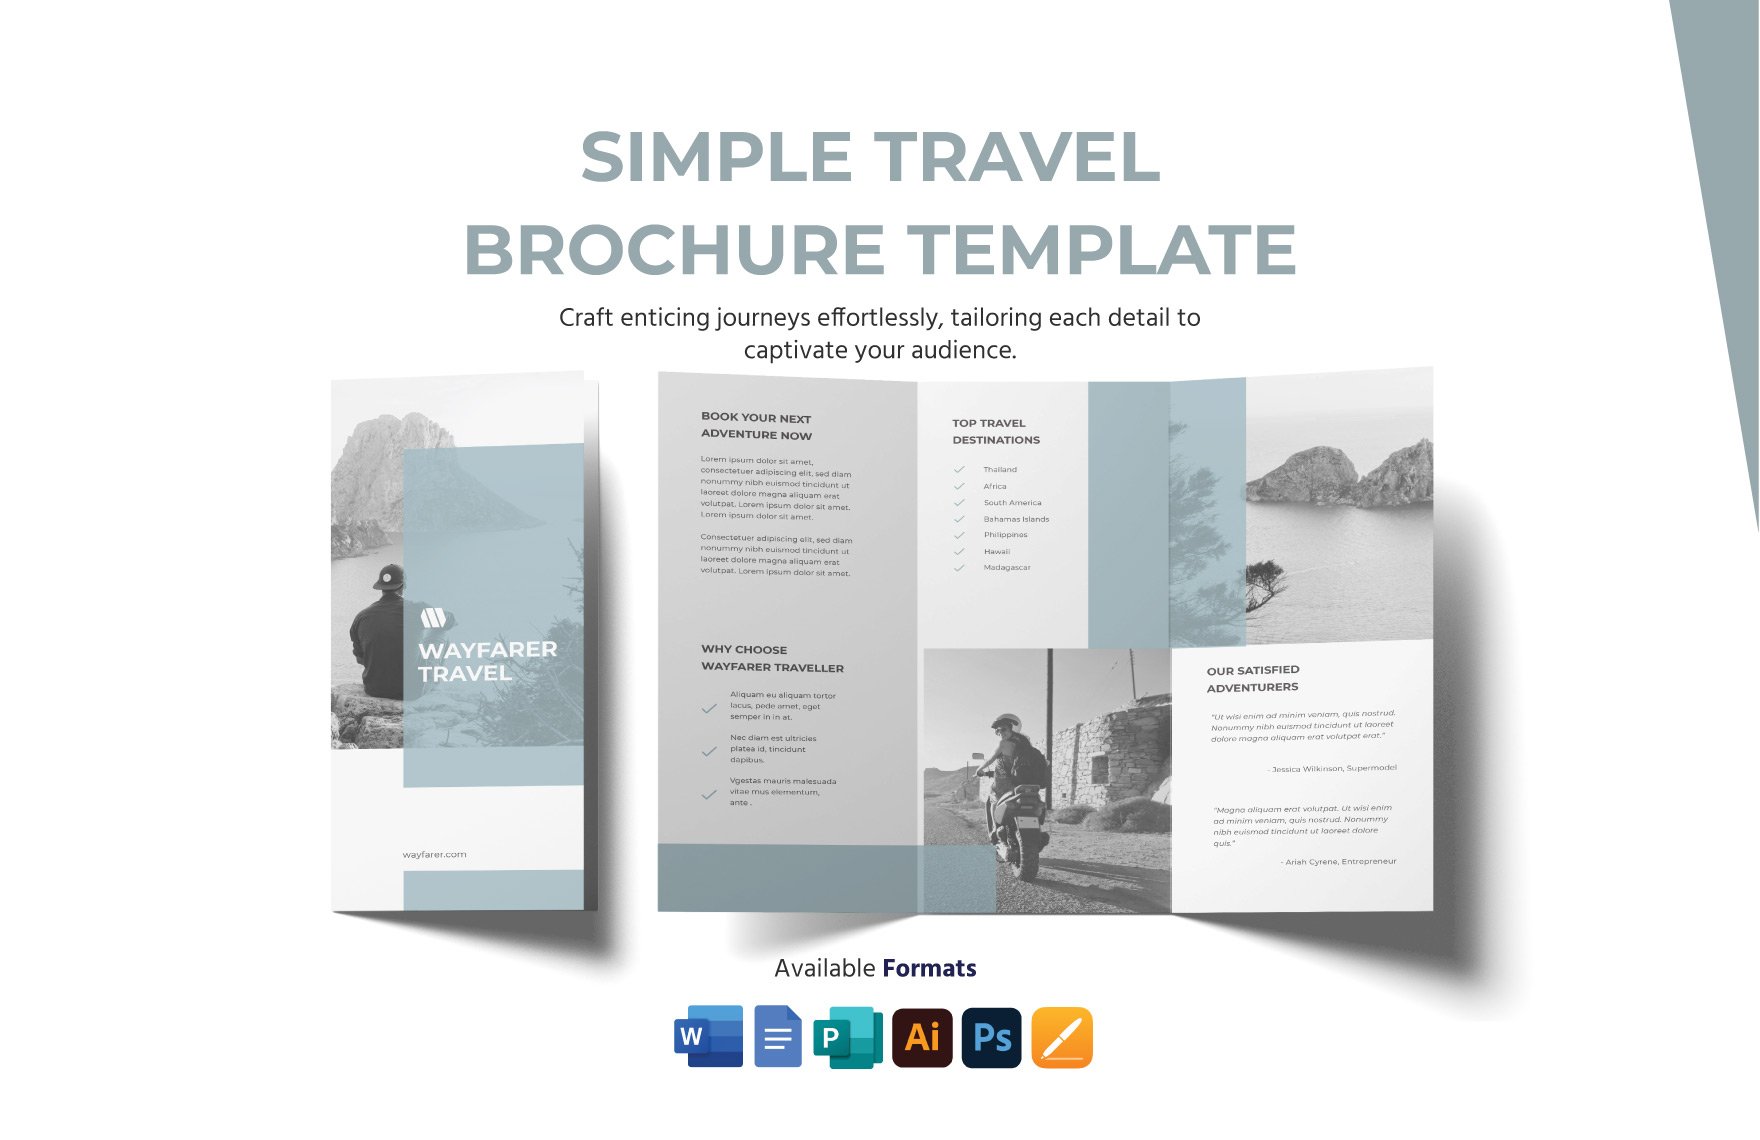 Simple Travel Brochure Template in Word, Google Docs, Illustrator, PSD, Apple Pages, Publisher